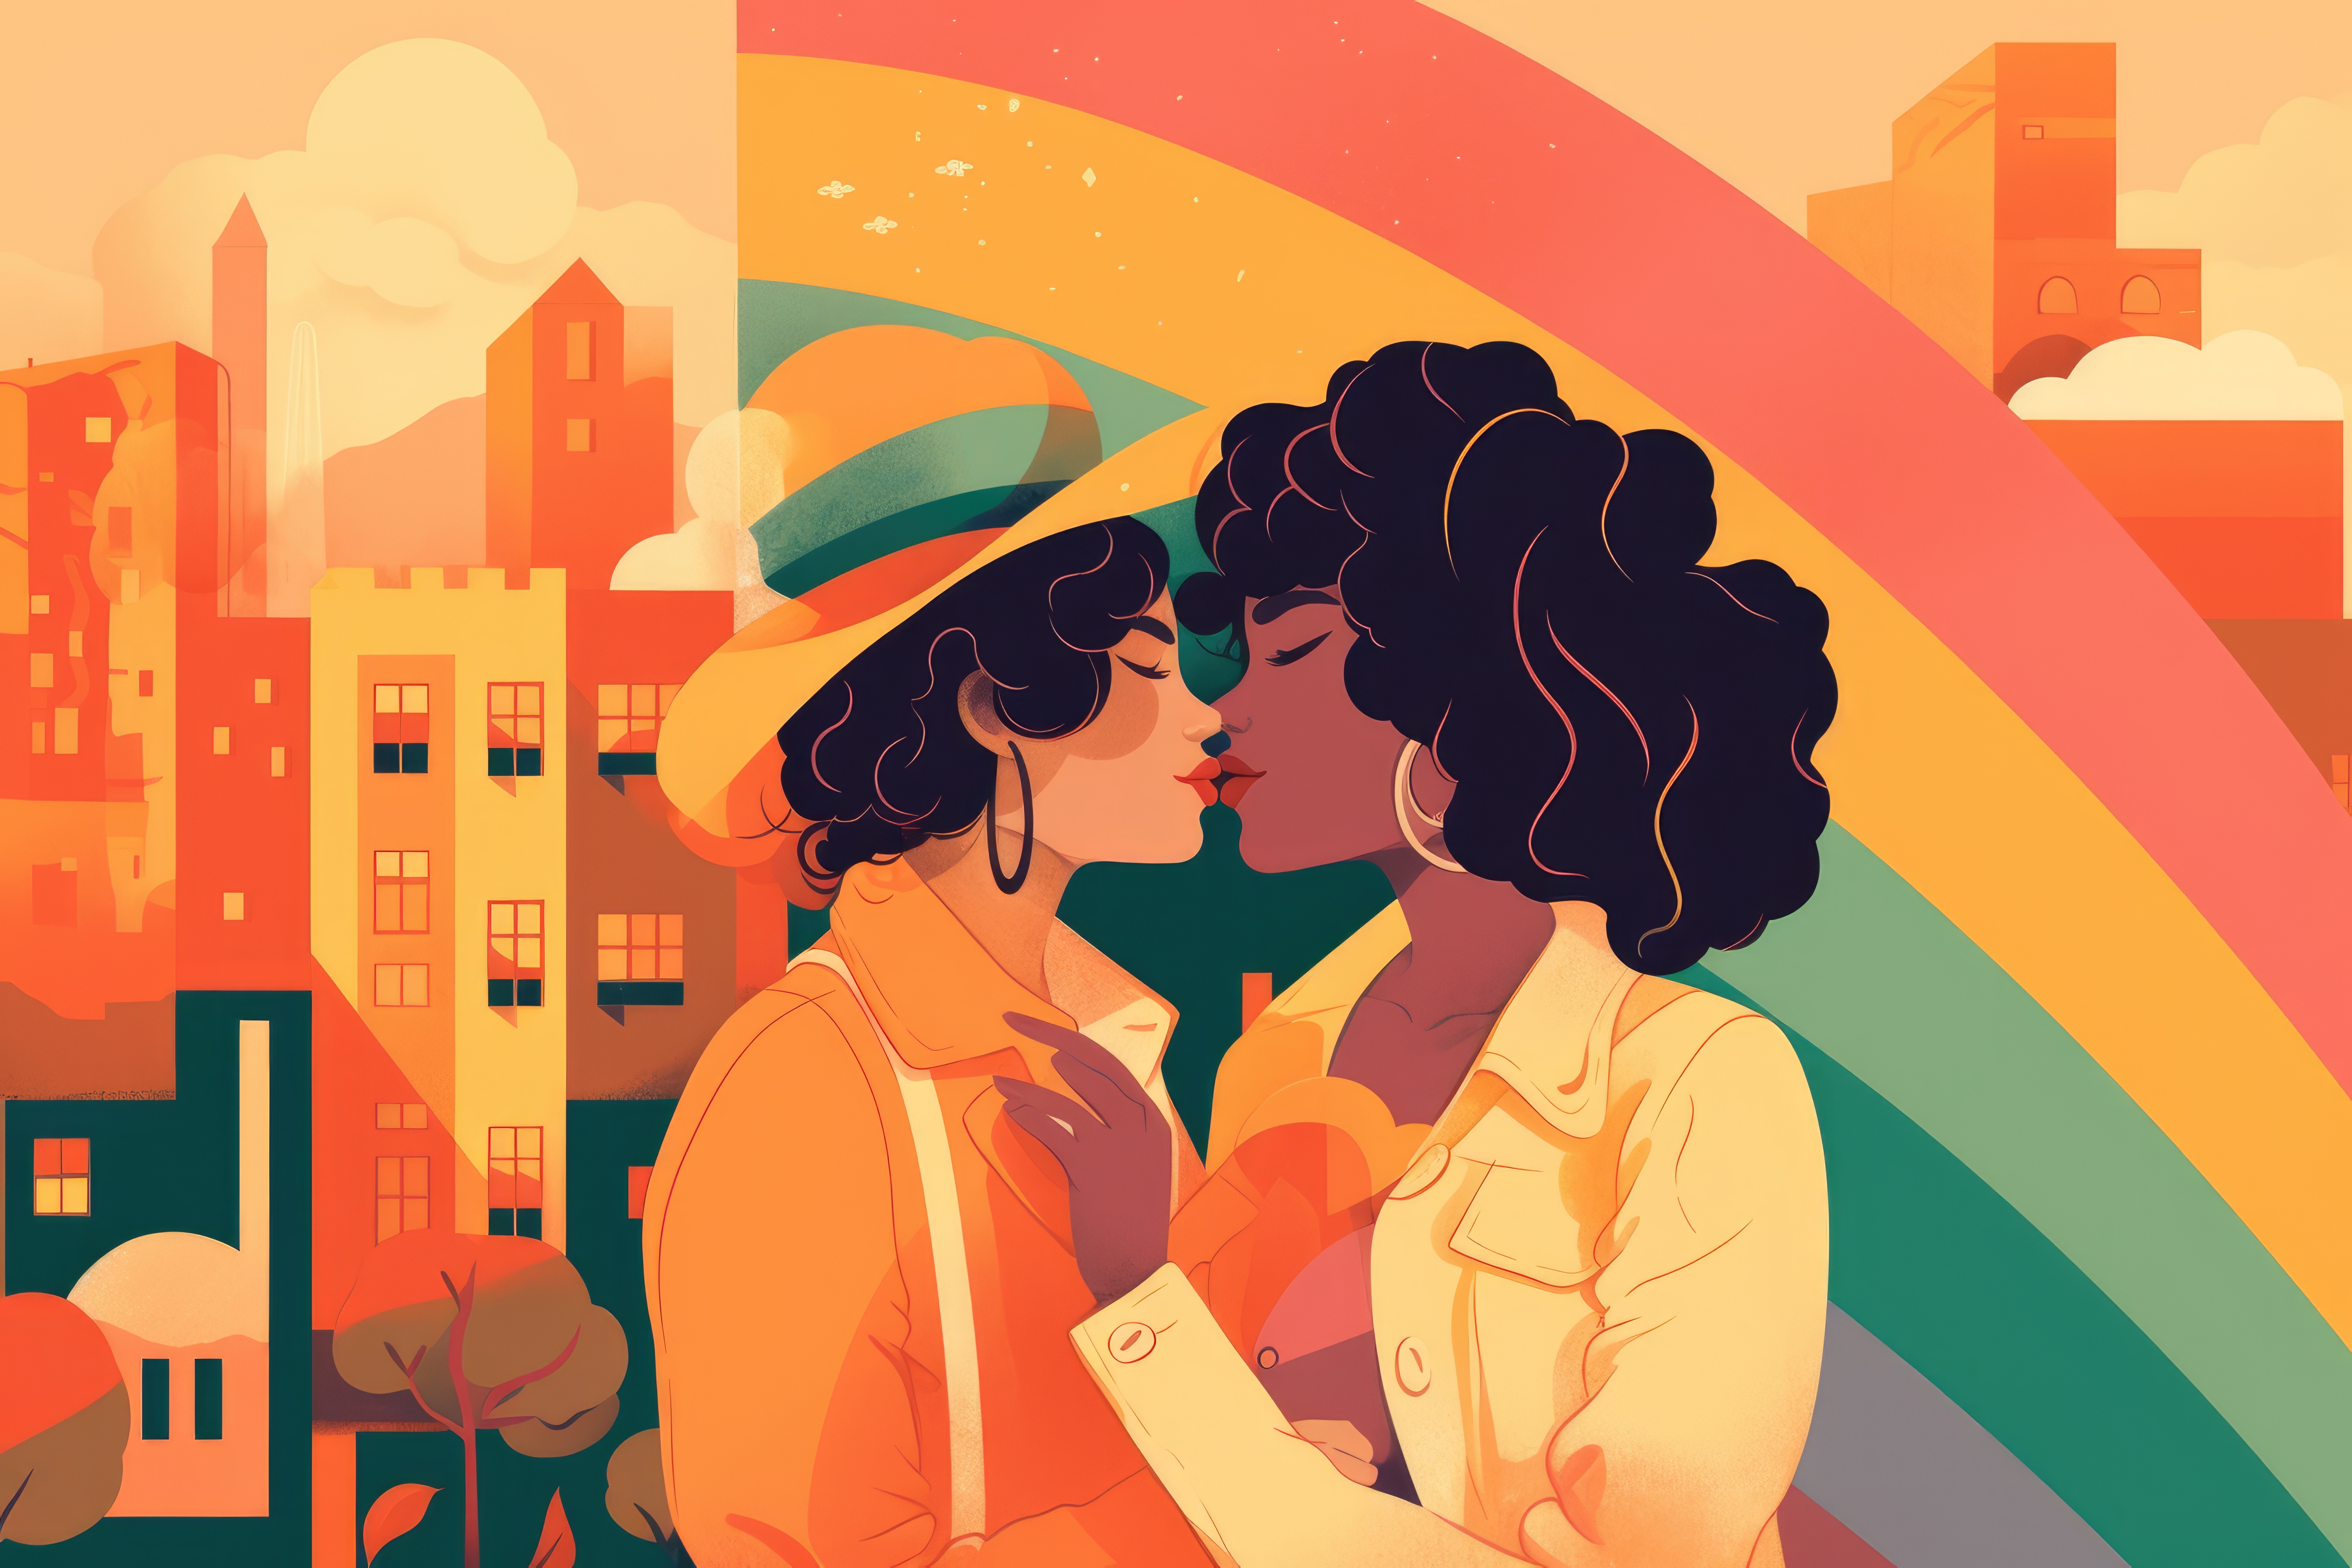 Lesbian couple over a rainbow and city backdrop